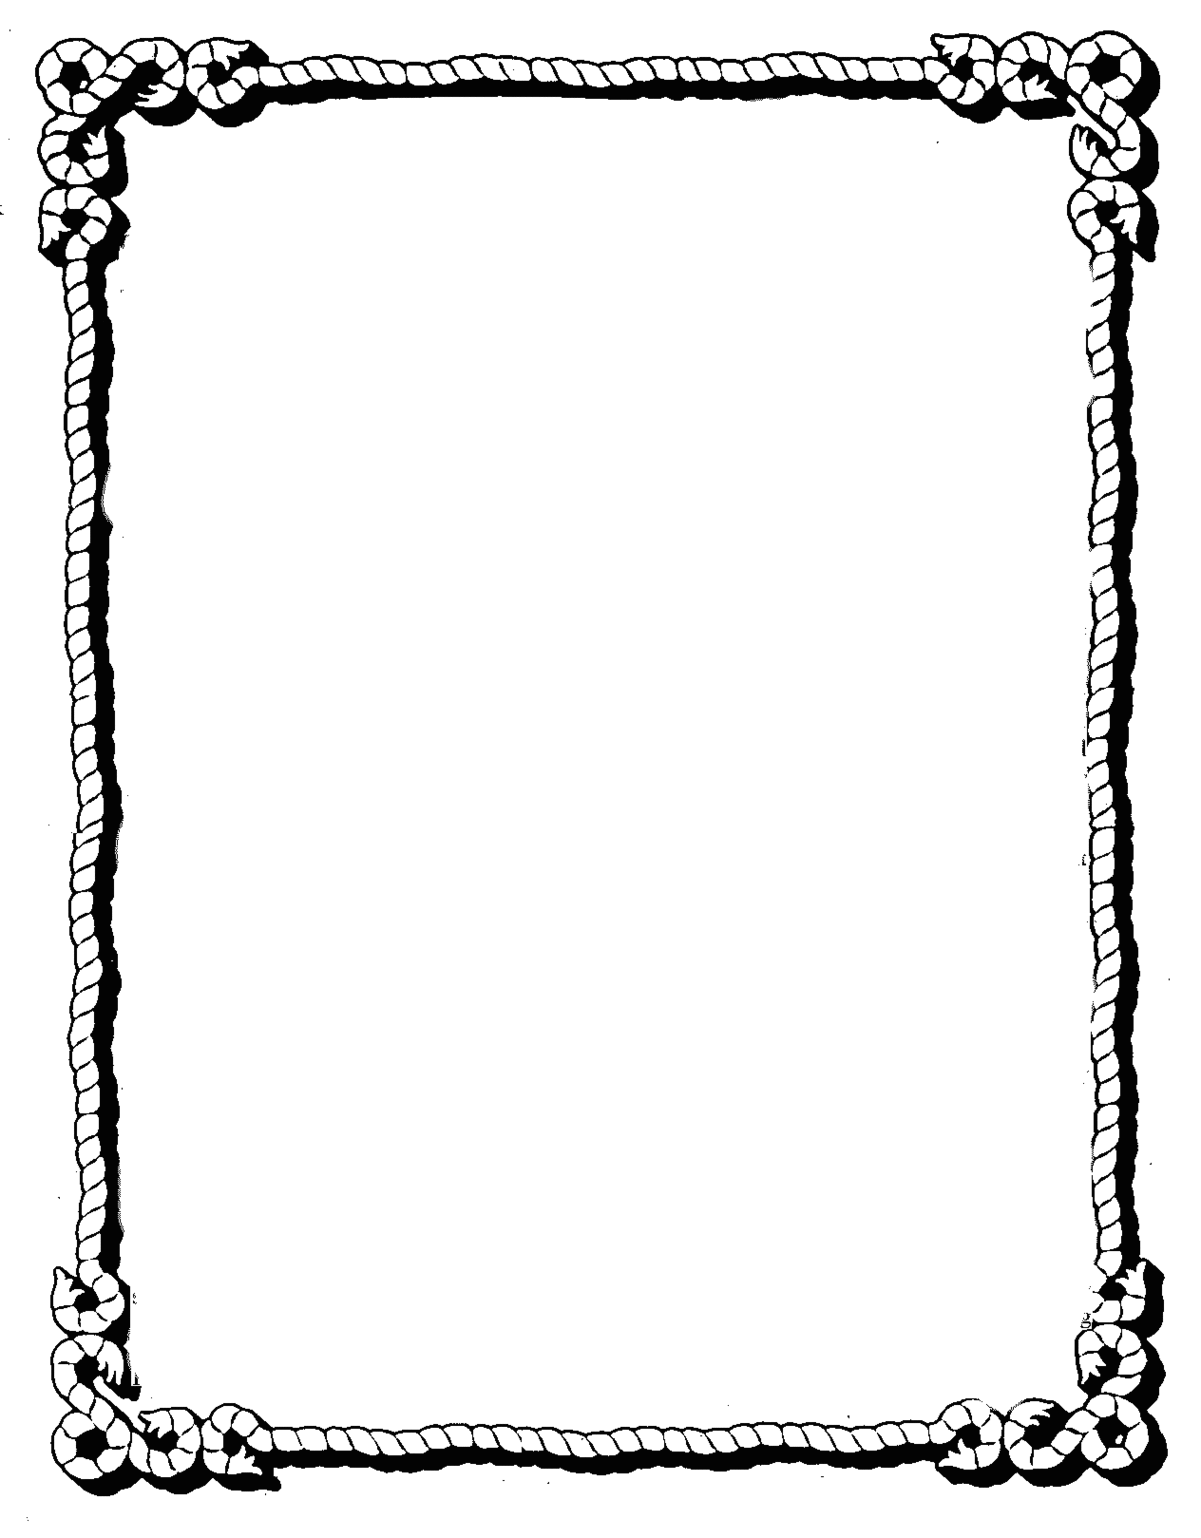 simple-black-page-borders-clipart-best